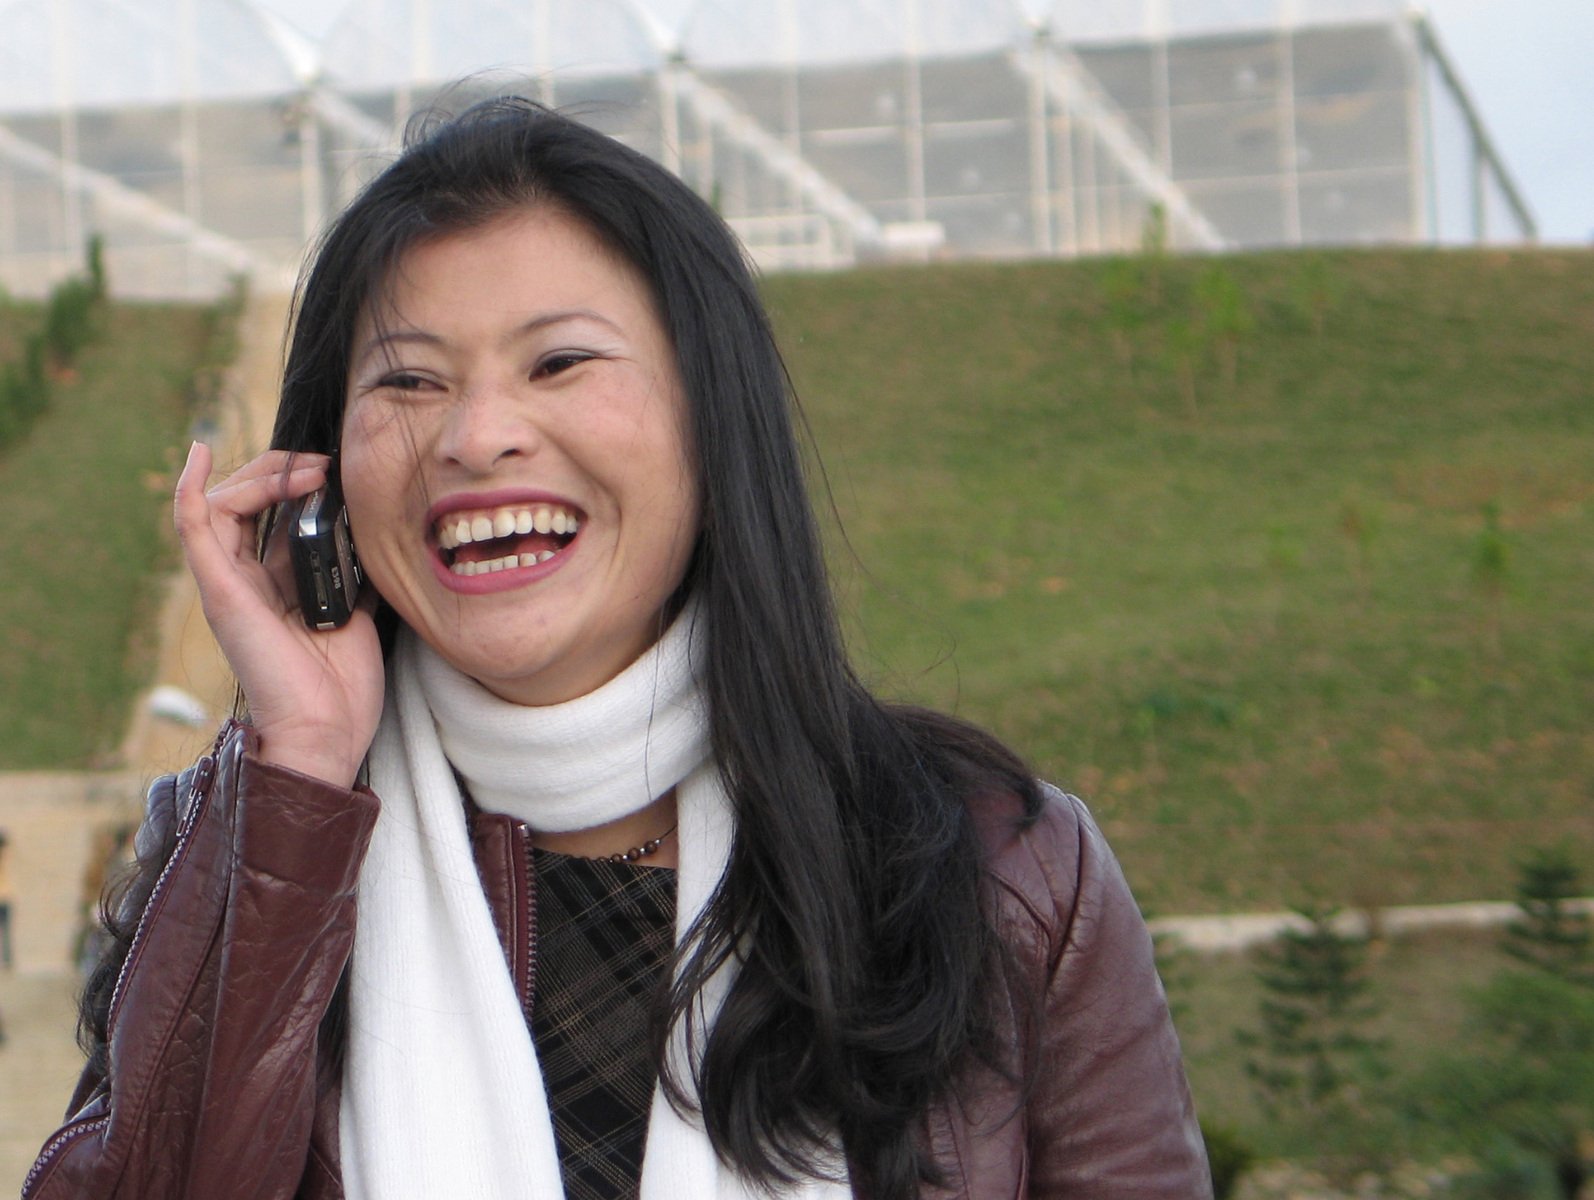 woman laughing while on cellphone near a field